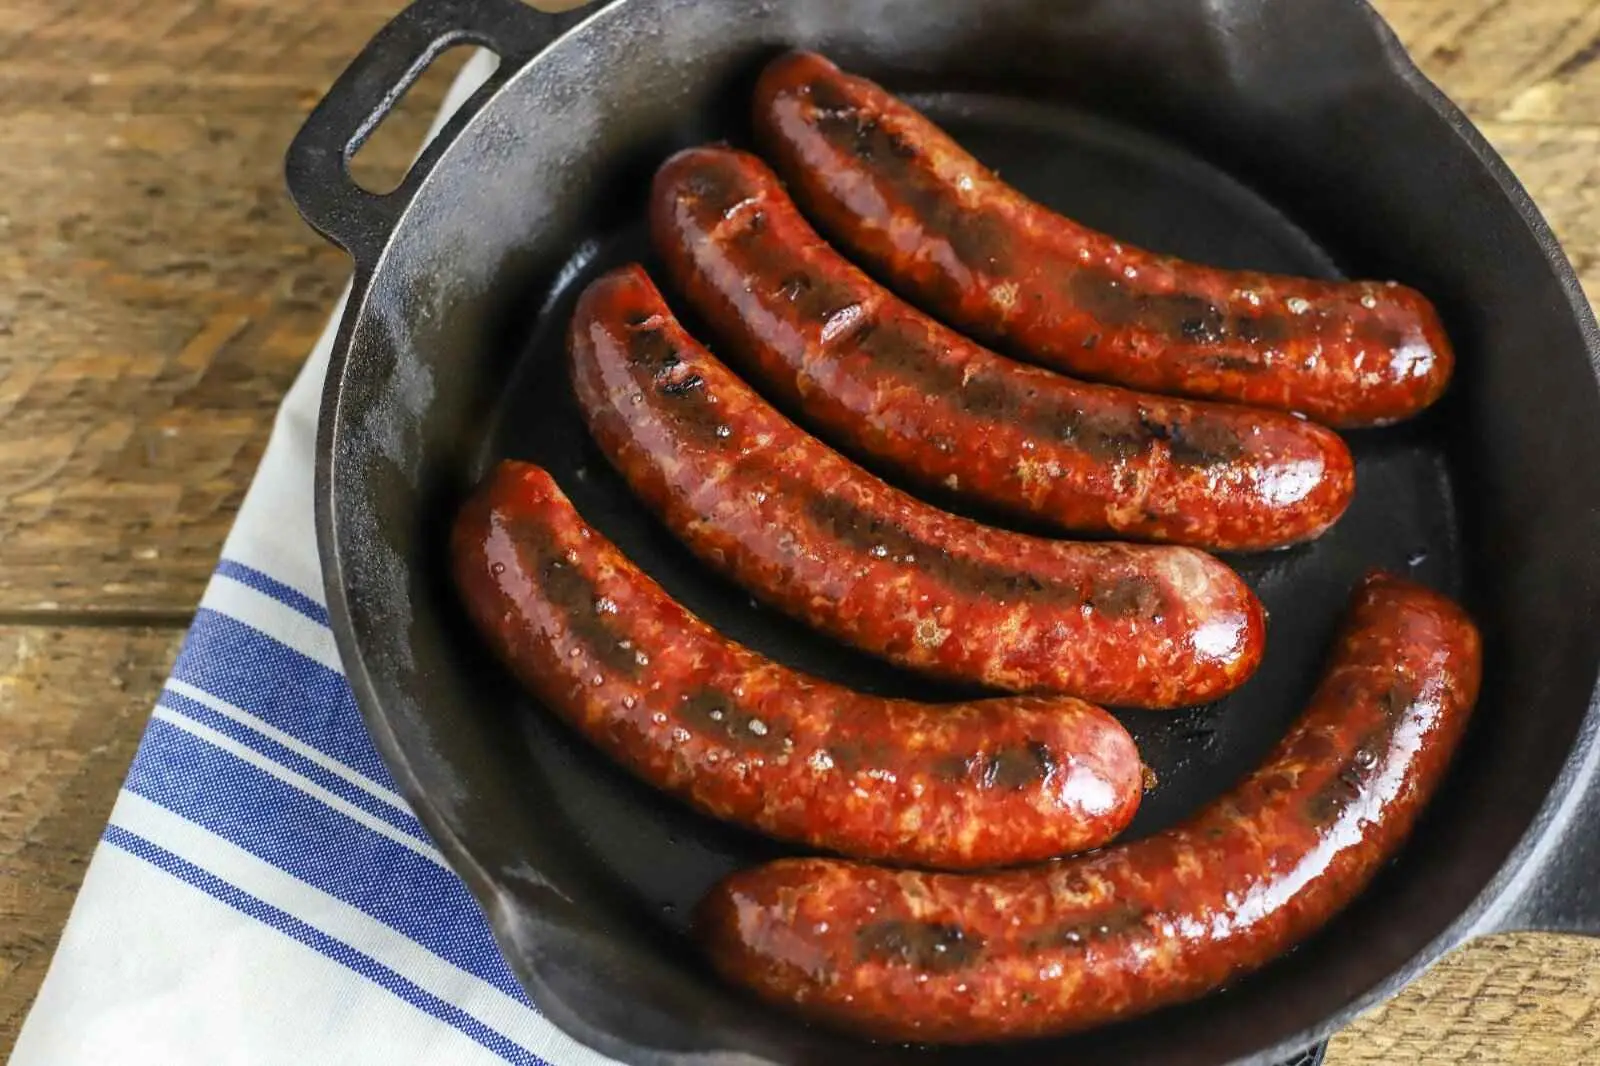 season smoked sausage - What herbs and spices go well with sausages